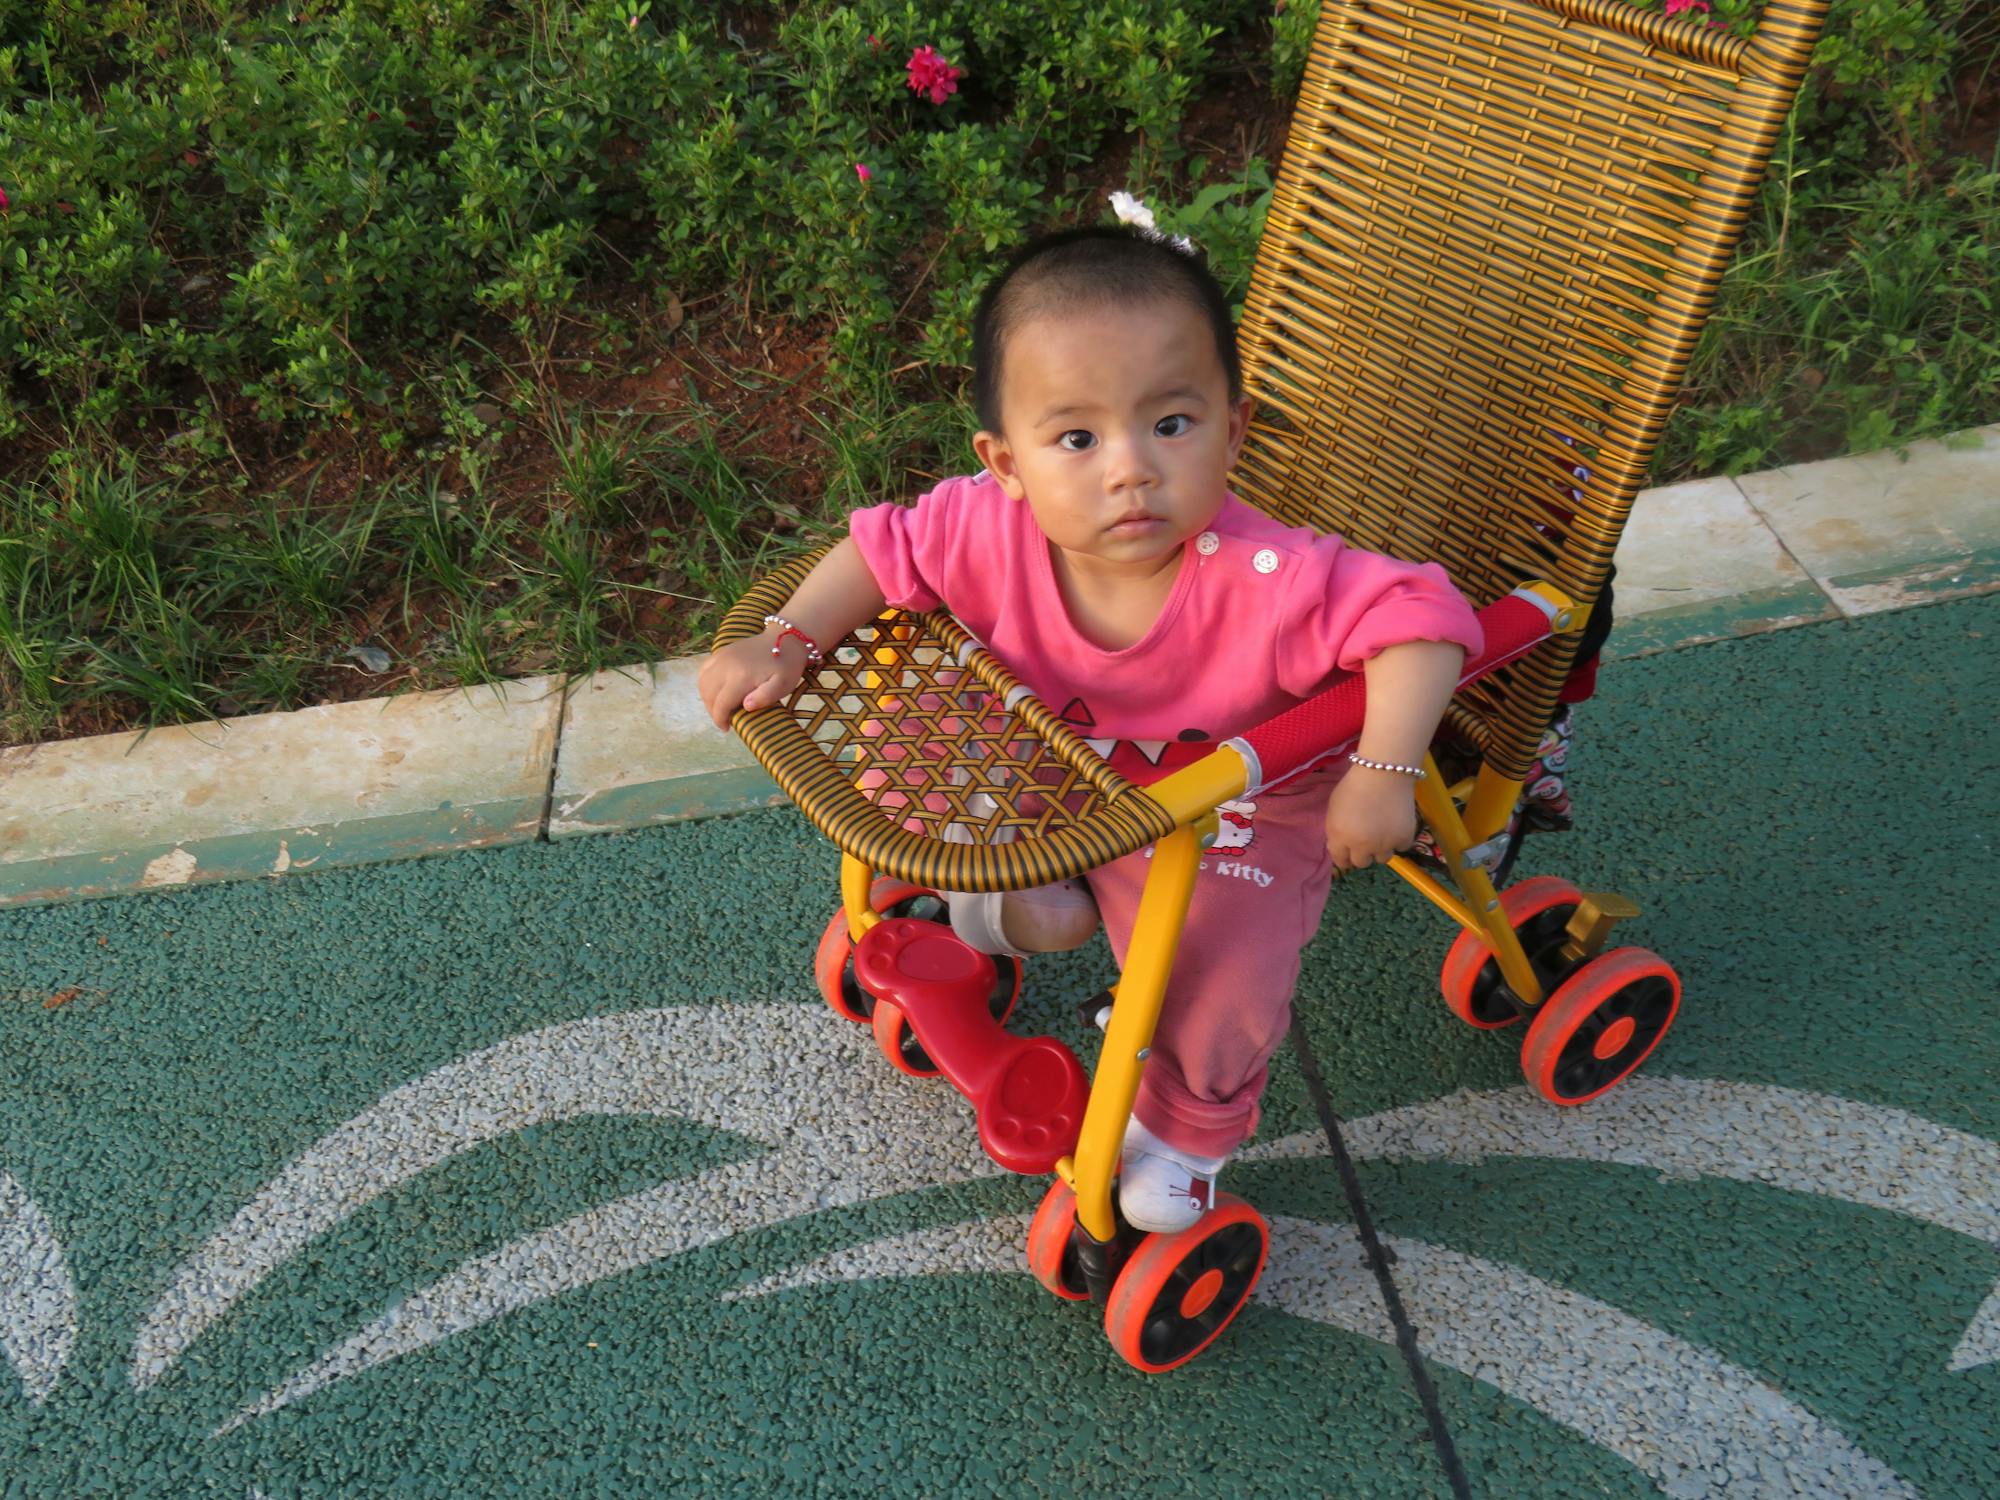 A cute baby girl sitting on a woven stroller